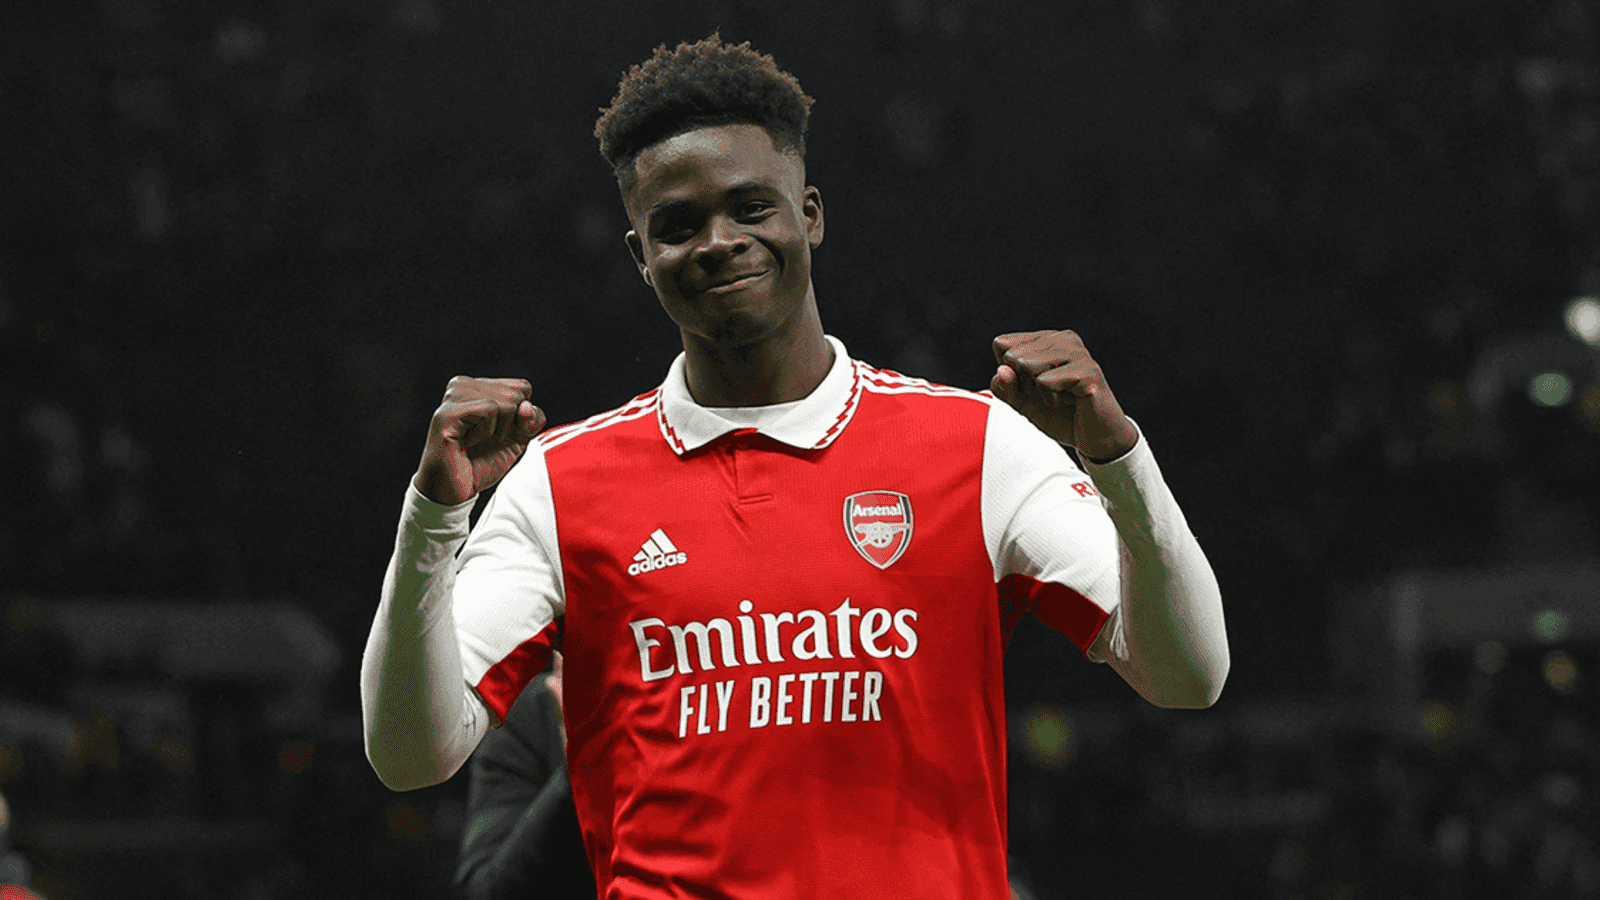 Premier League Player of the Month nod for Saka